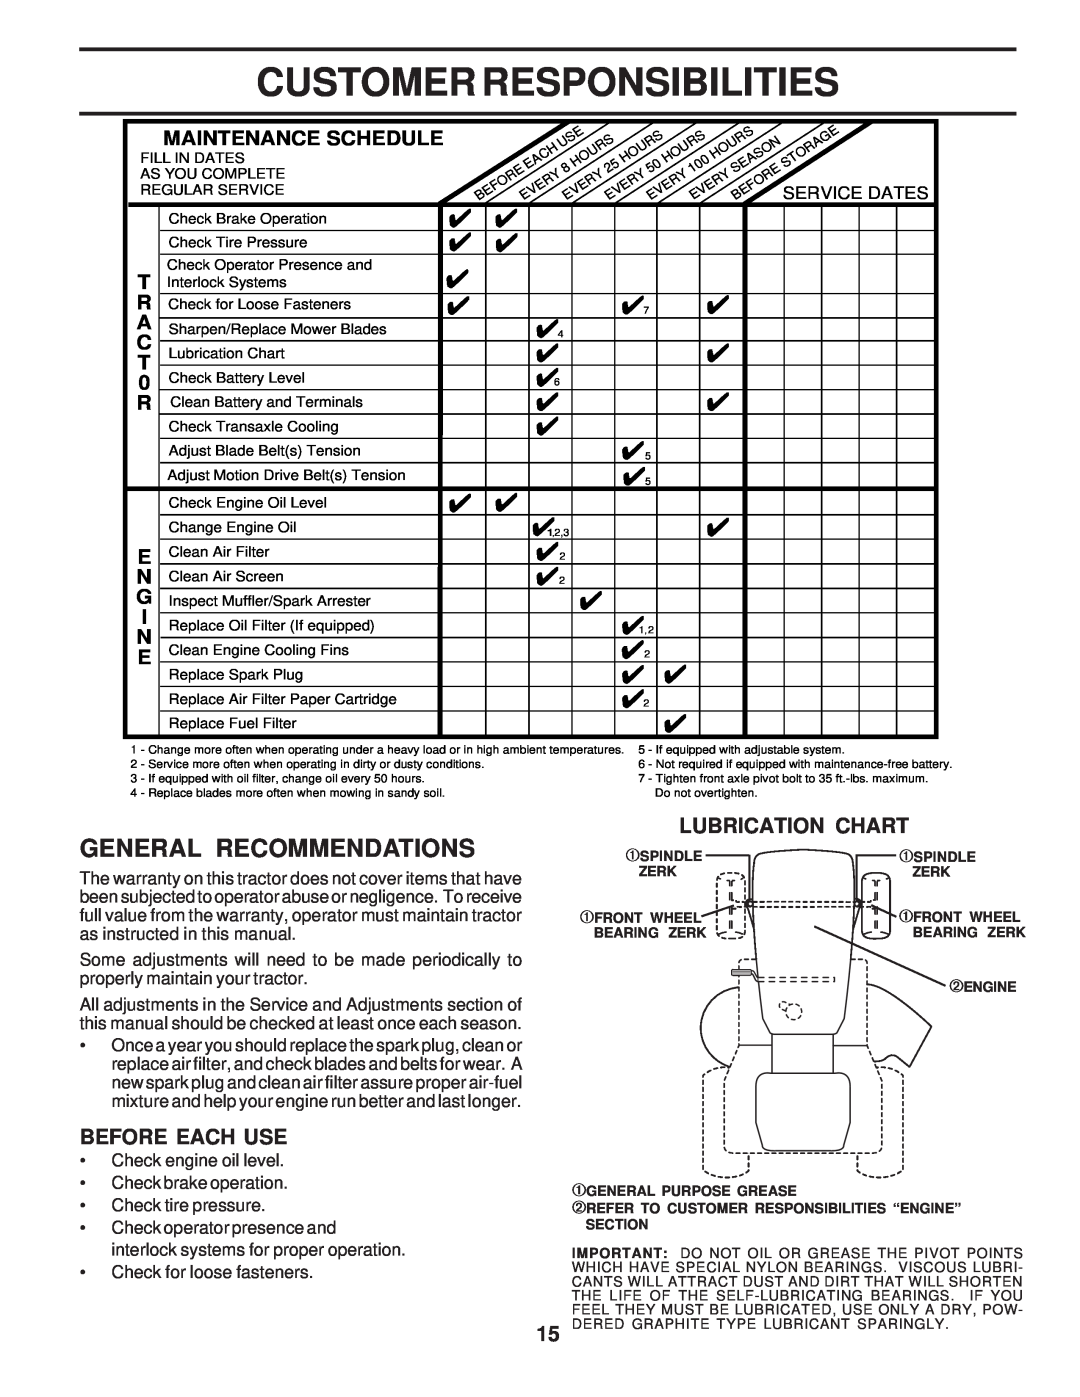 Poulan PR20H42STA owner manual Customer Responsibilities, General Recommendations, ¿ Lubrication Chart, Before Each Use 